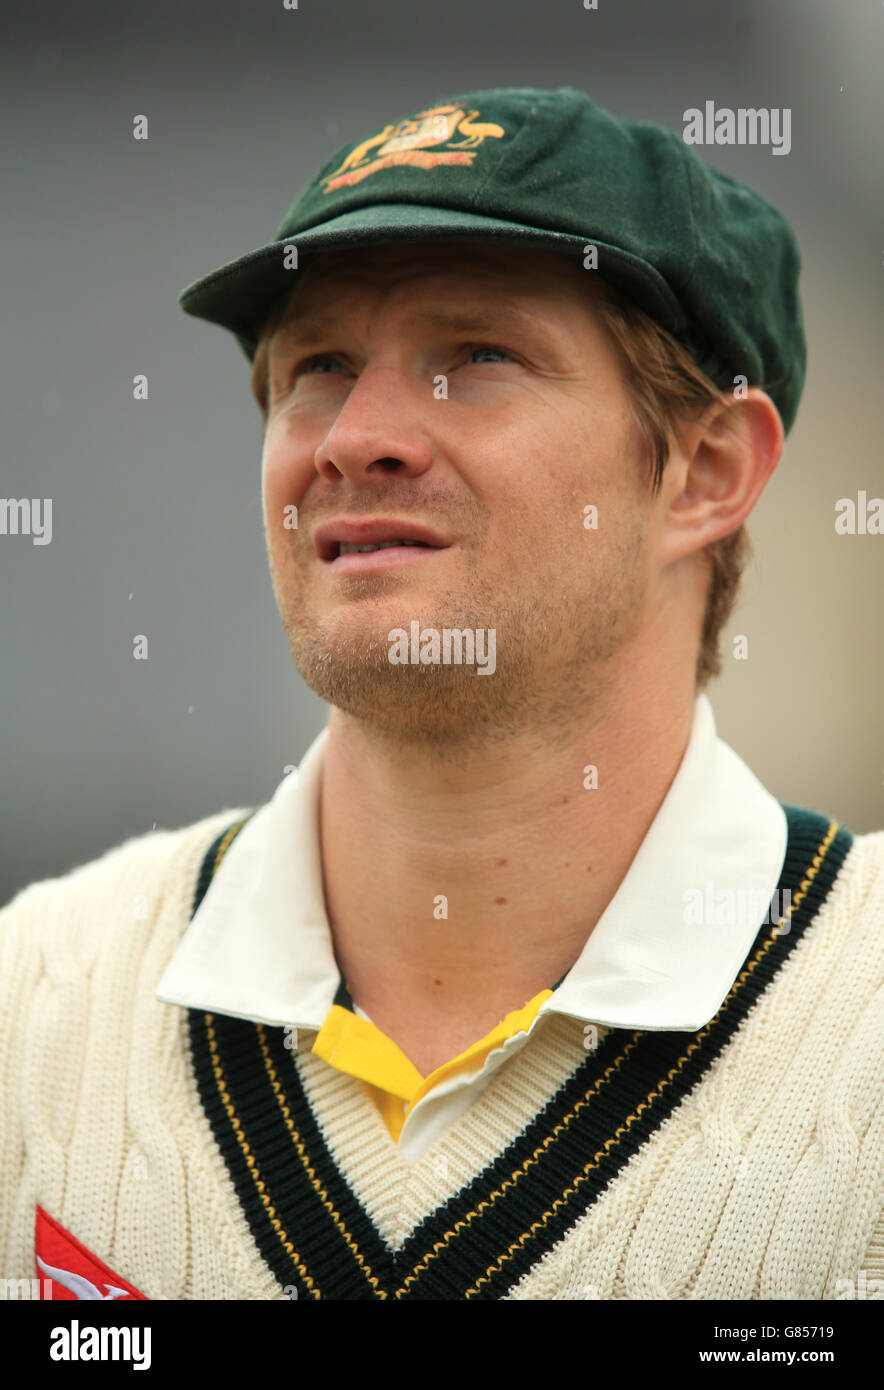 Australia's Shane Watson during day two of the tour match at the 3aaa County Ground, Derby. PRESS ASSOCIATION Photo. Picture date: Friday July 24, 2015. See PA story CRICKET Derbyshire. Photo credit should read: Mike Egerton/PA Wire. RESTRICTIONS: . No commercial use without prior written consent of the ECB. Still image use only - no moving images to emulate broadcast. No removing or obscuring of sponsor logos. Call +44 (0)1158 447447 for further information. Stock Photo